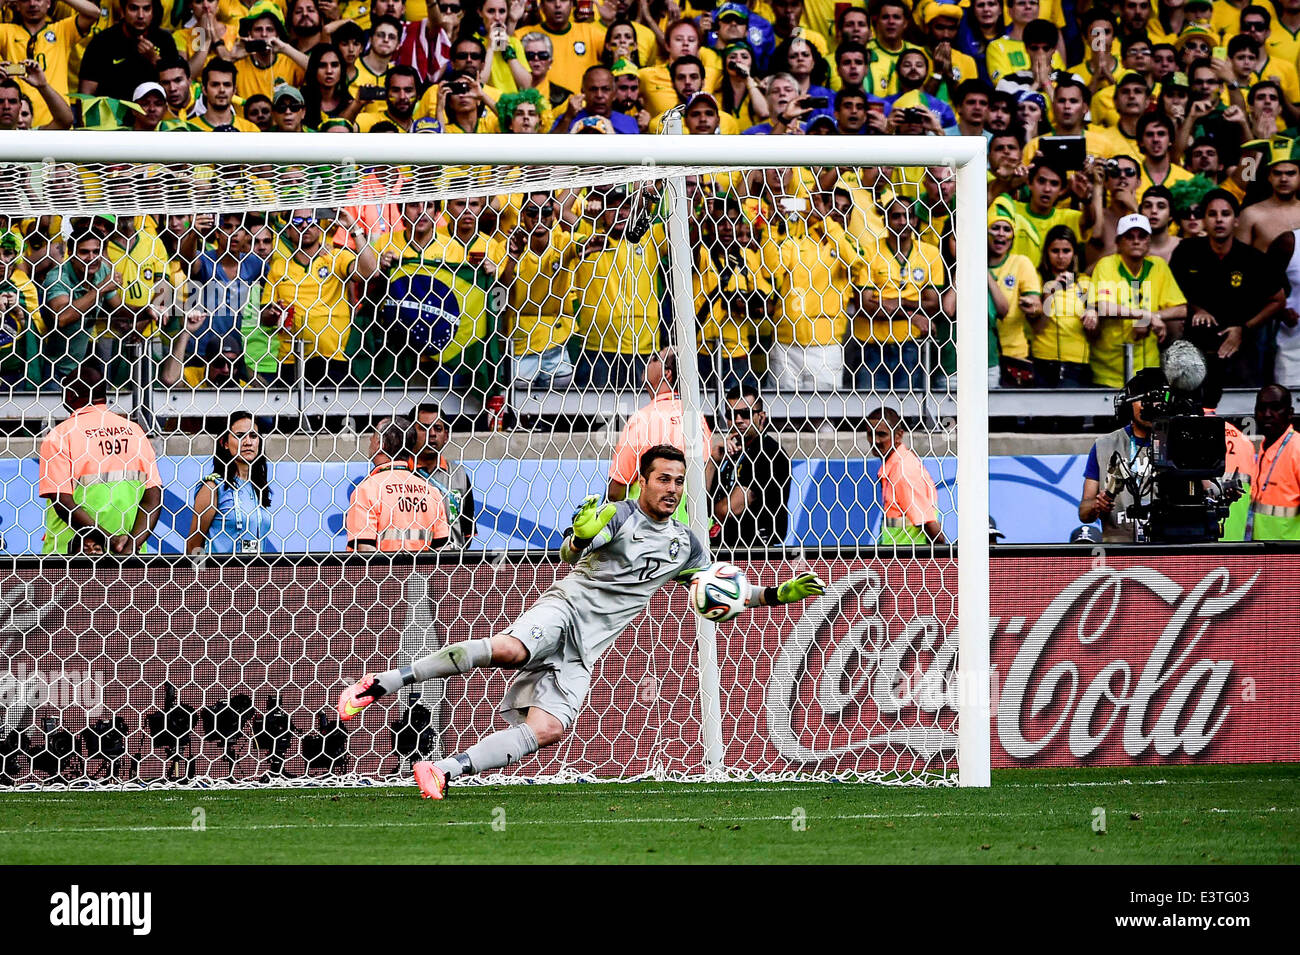 Belo Horizonte, Minas Gerais, Brazil. 28th June, 2014. Brazil wins Chile in the penalty shootouts at the Round of 16 match of the 2014 World Cup, this saturday, June 28th, in Belo Horizonte. Julio Cesar saved the kicks from Mauricio Pinilla and Alexis Sanchez. Willian and Hulk, from Brazil, missed the goal. David Luiz, Marcelo and Neymar, for Brazil, and Aranguiz and Diaz, for Chile, scored. The final result 3-2 Credit:  Gustavo Basso/NurPhoto/ZUMAPRESS.com/Alamy Live News Stock Photo